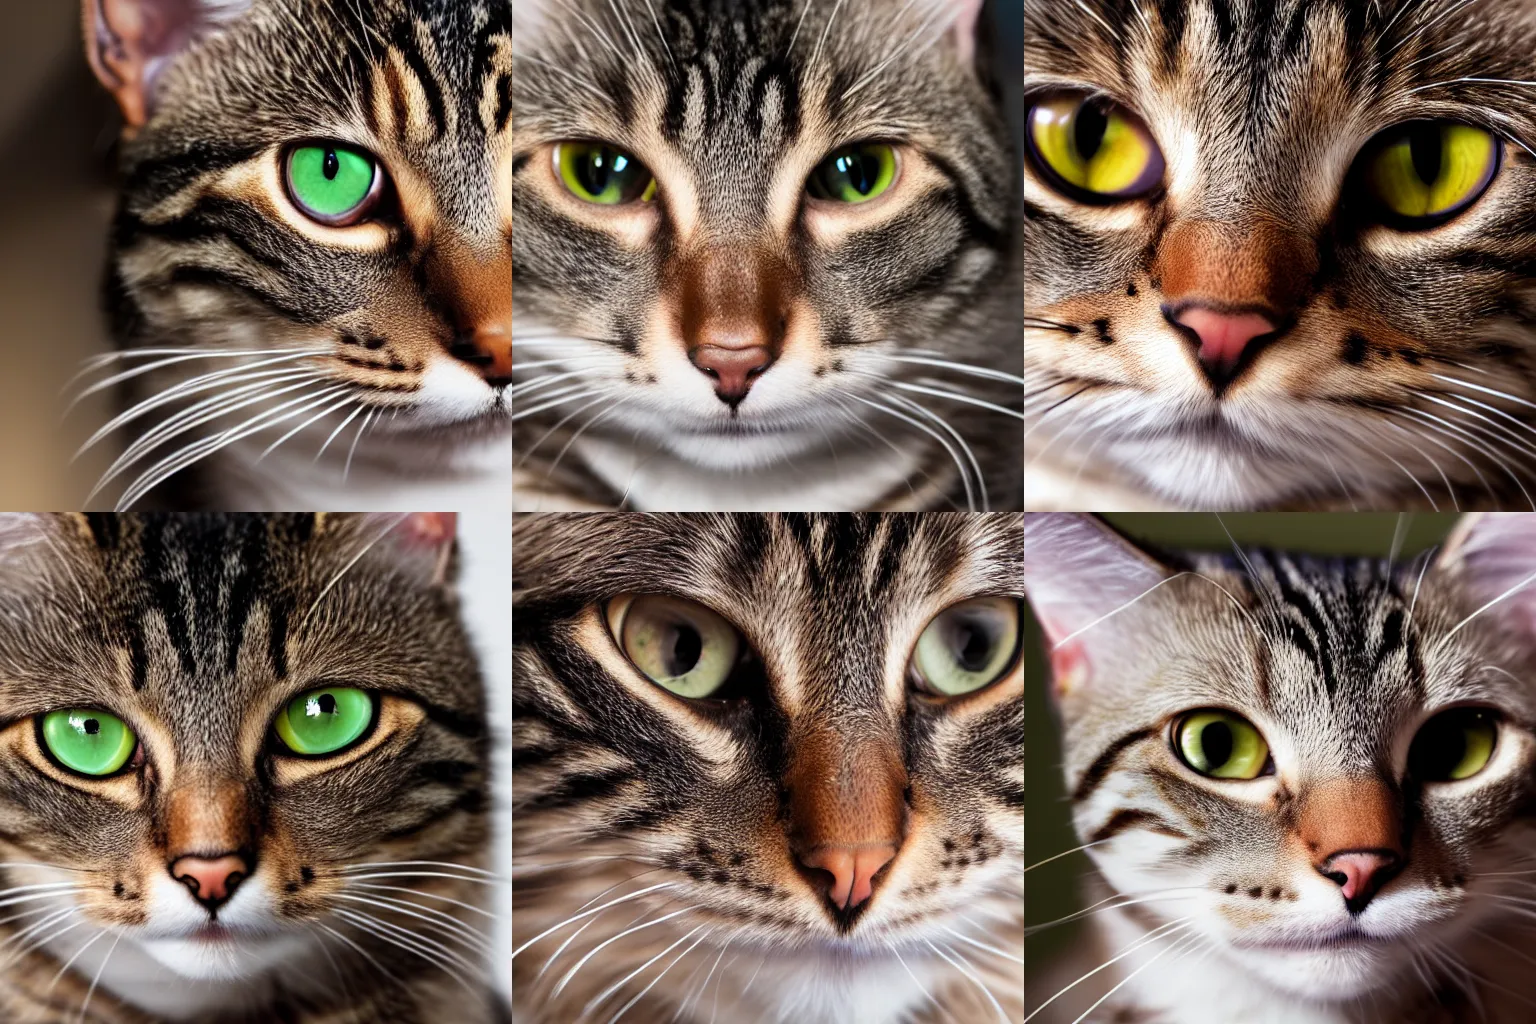 Prompt: extreme close-up portrait of a tabby cat looking into the camera, studio lighting